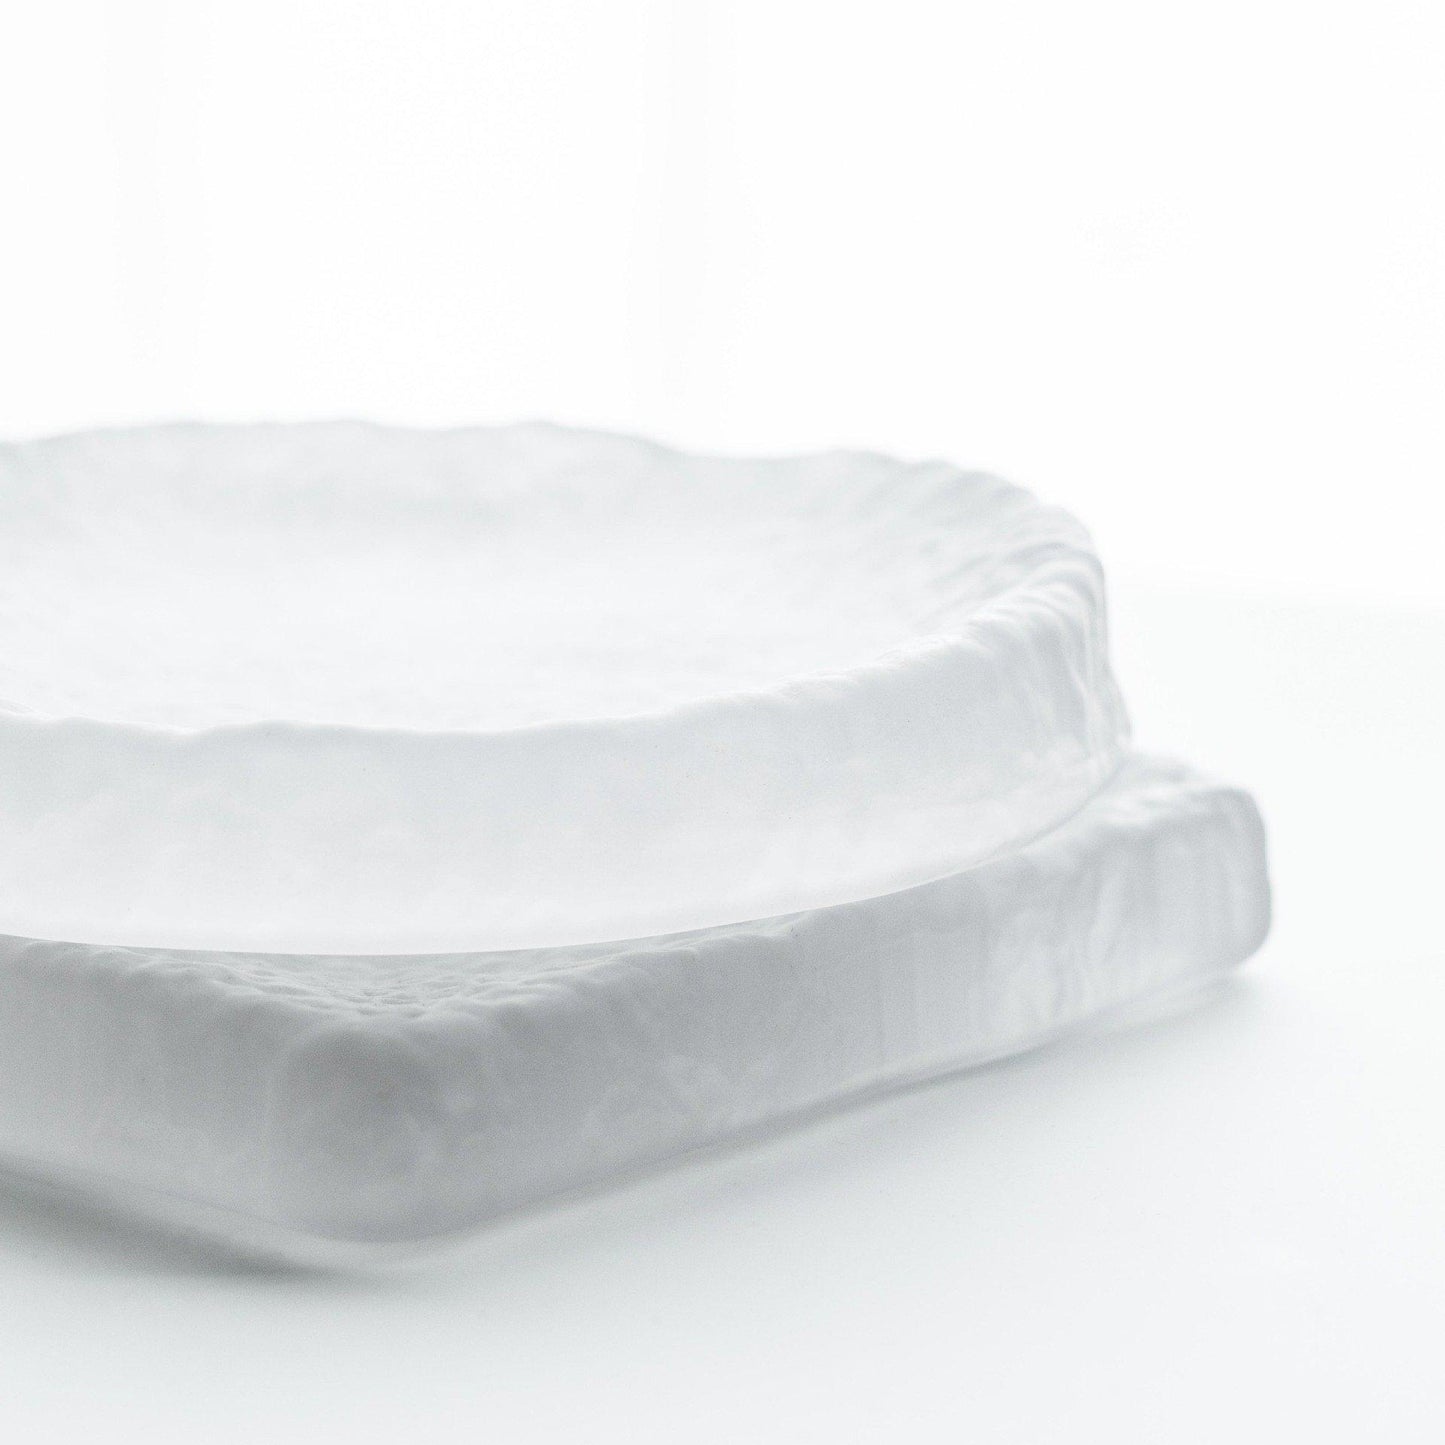 Ice-cold Frosted Glass Plate-Furnishings- A Bit Sleepy | Homedecor Concept Store